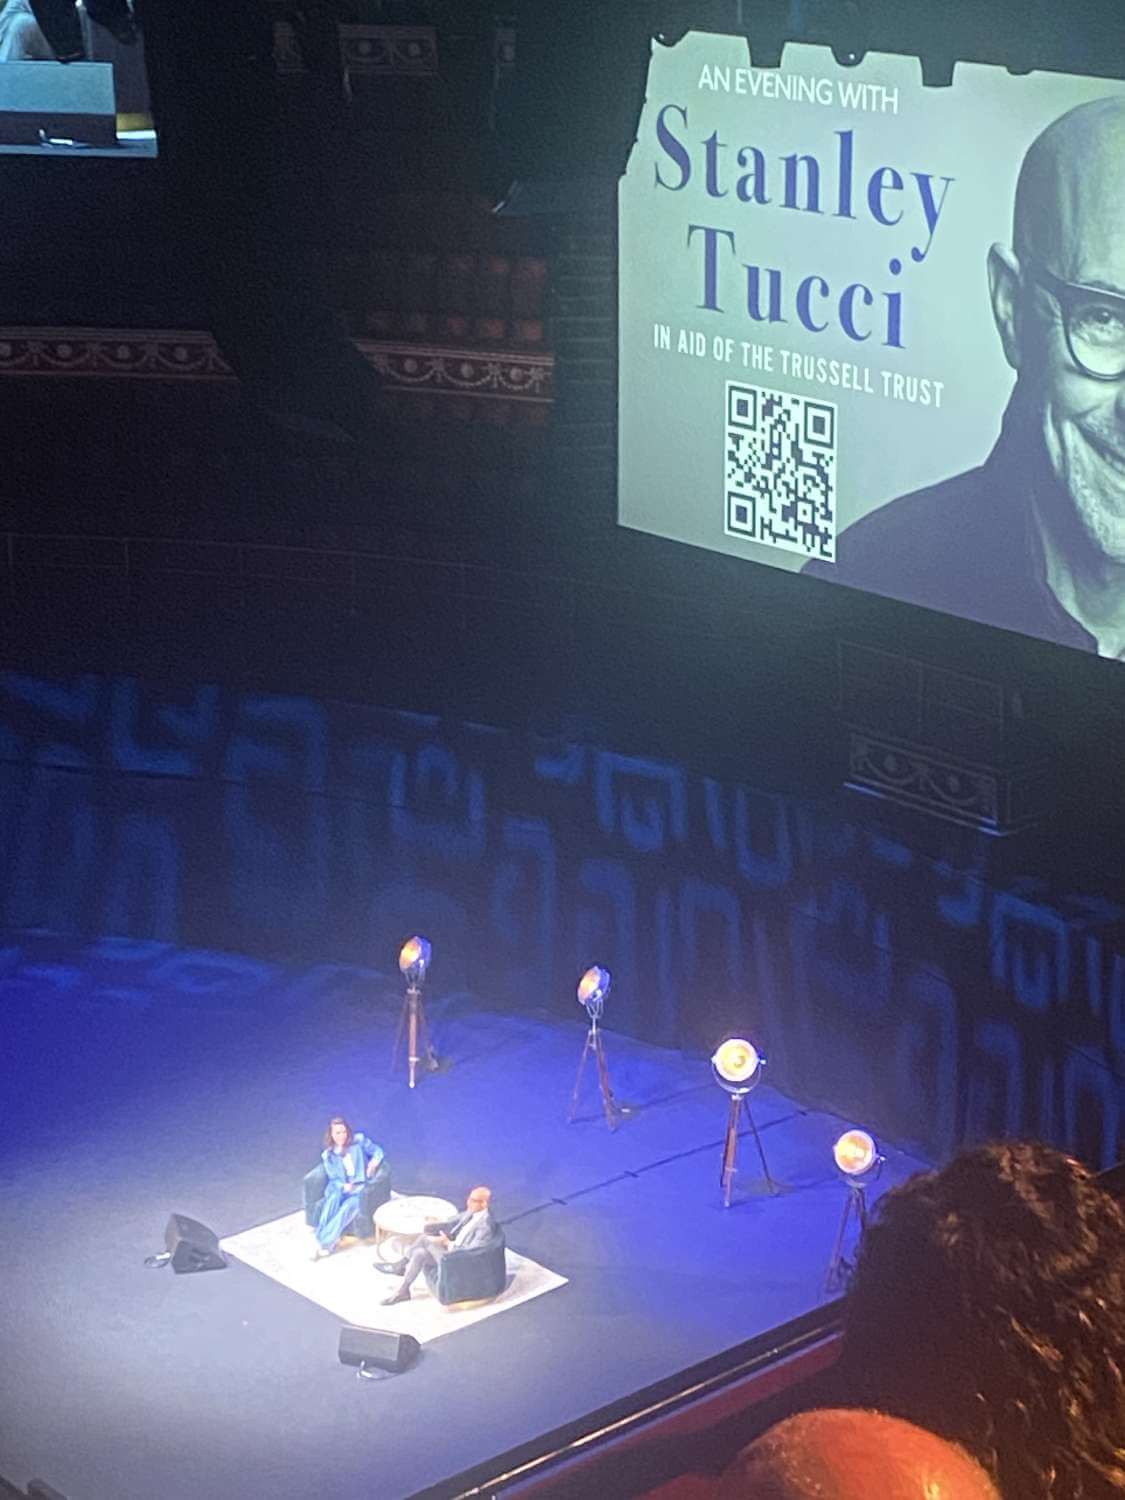 View of An Evening With Stanley Tucci at Royal Albert Hall from Seat Block X, Row 4, Seat 195